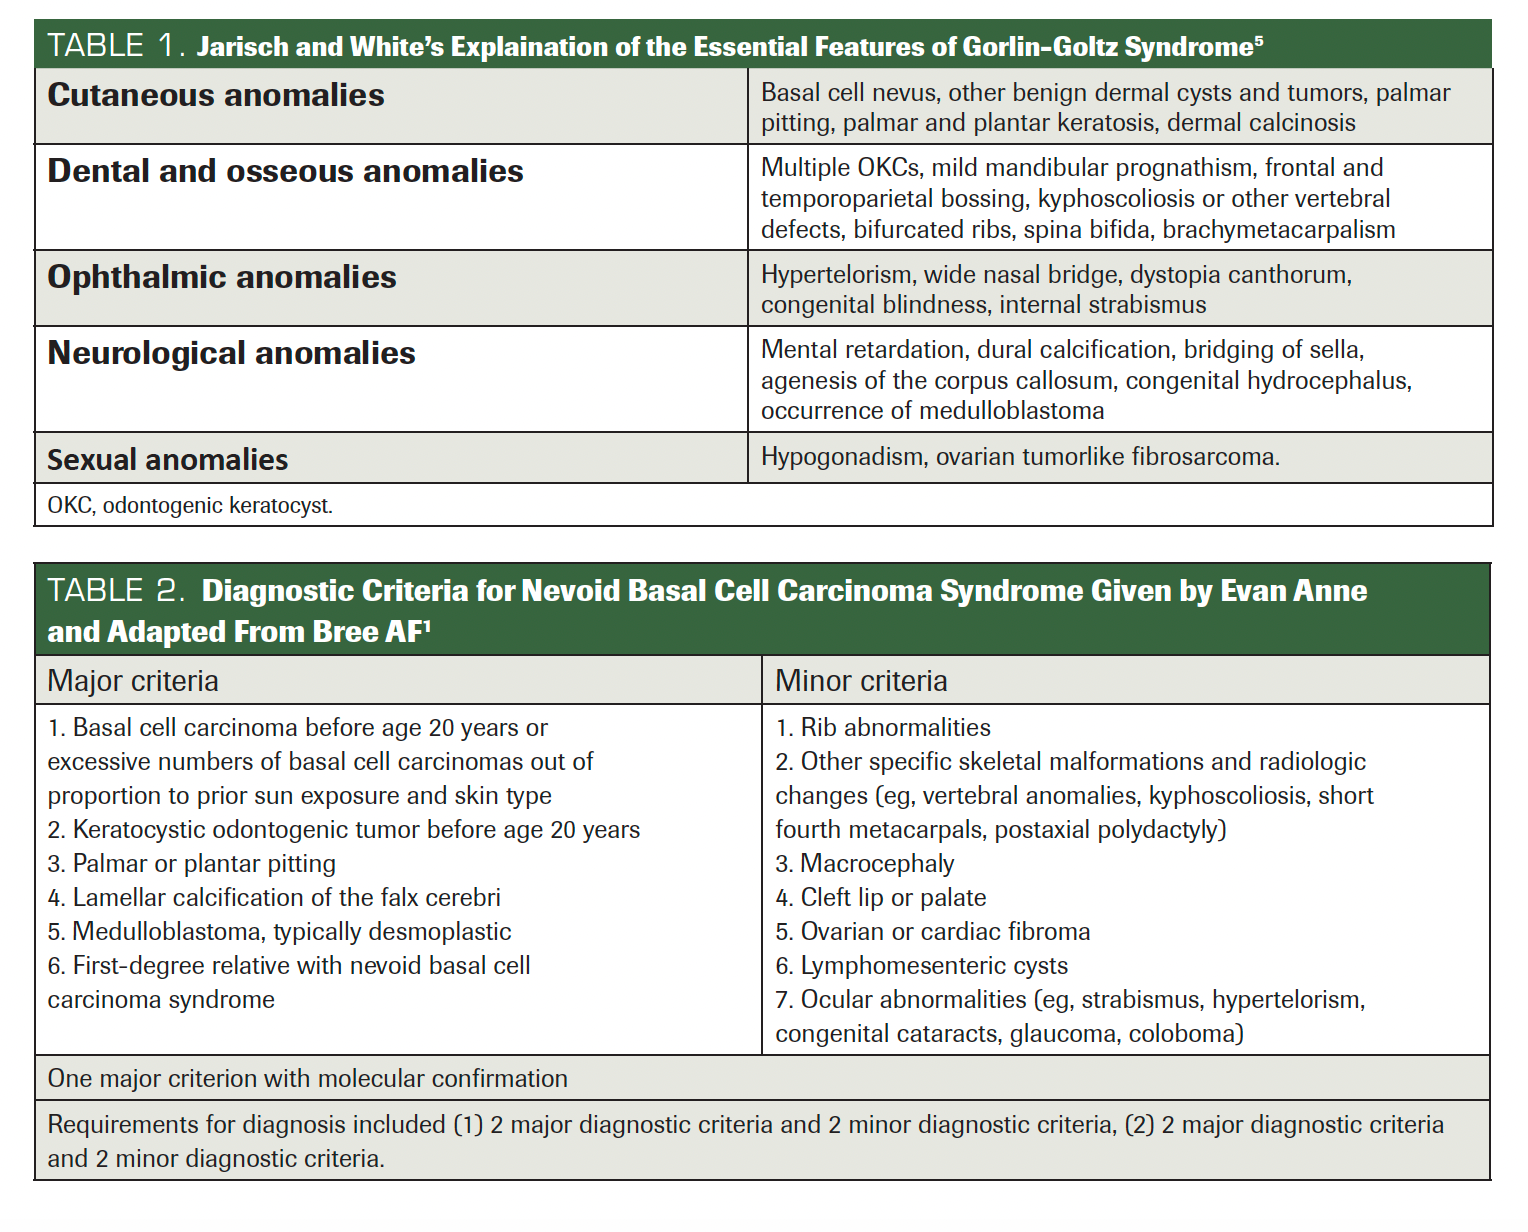 TABLE 1. Jarisch and White’s Explaination of the Essential Features of Gorlin-Goltz Syndrome

TABLE 2. Diagnostic Criteria for Nevoid Basal Cell Carcinoma Syndrome Given by Evan Anne and Adapted From Bree AF1